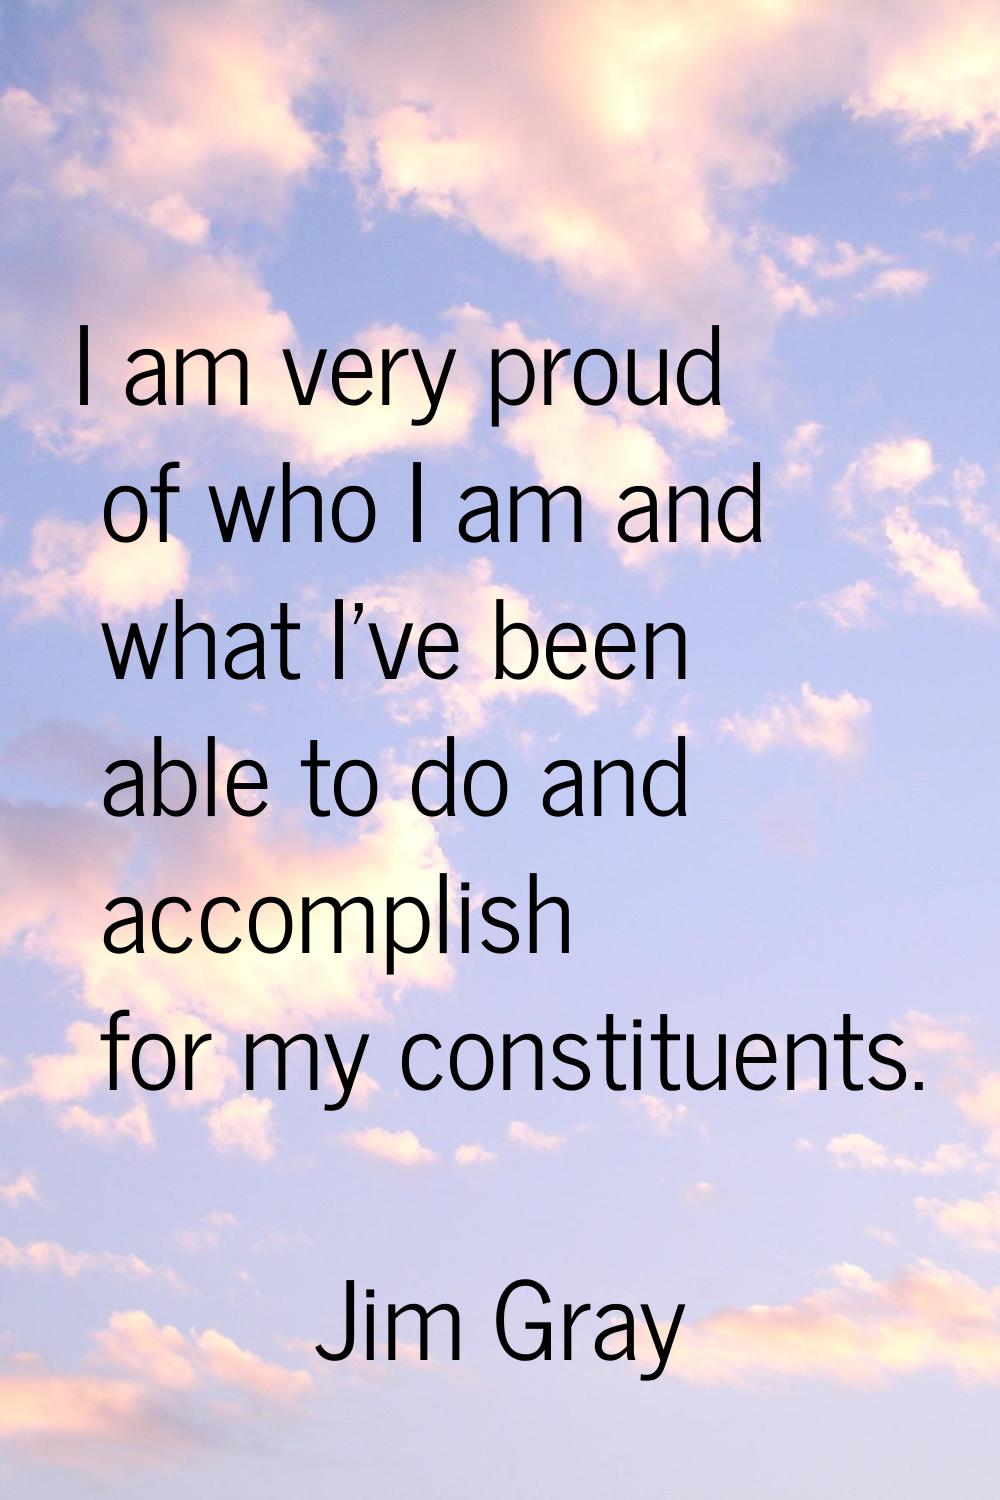 I am very proud of who I am and what I've been able to do and accomplish for my constituents.